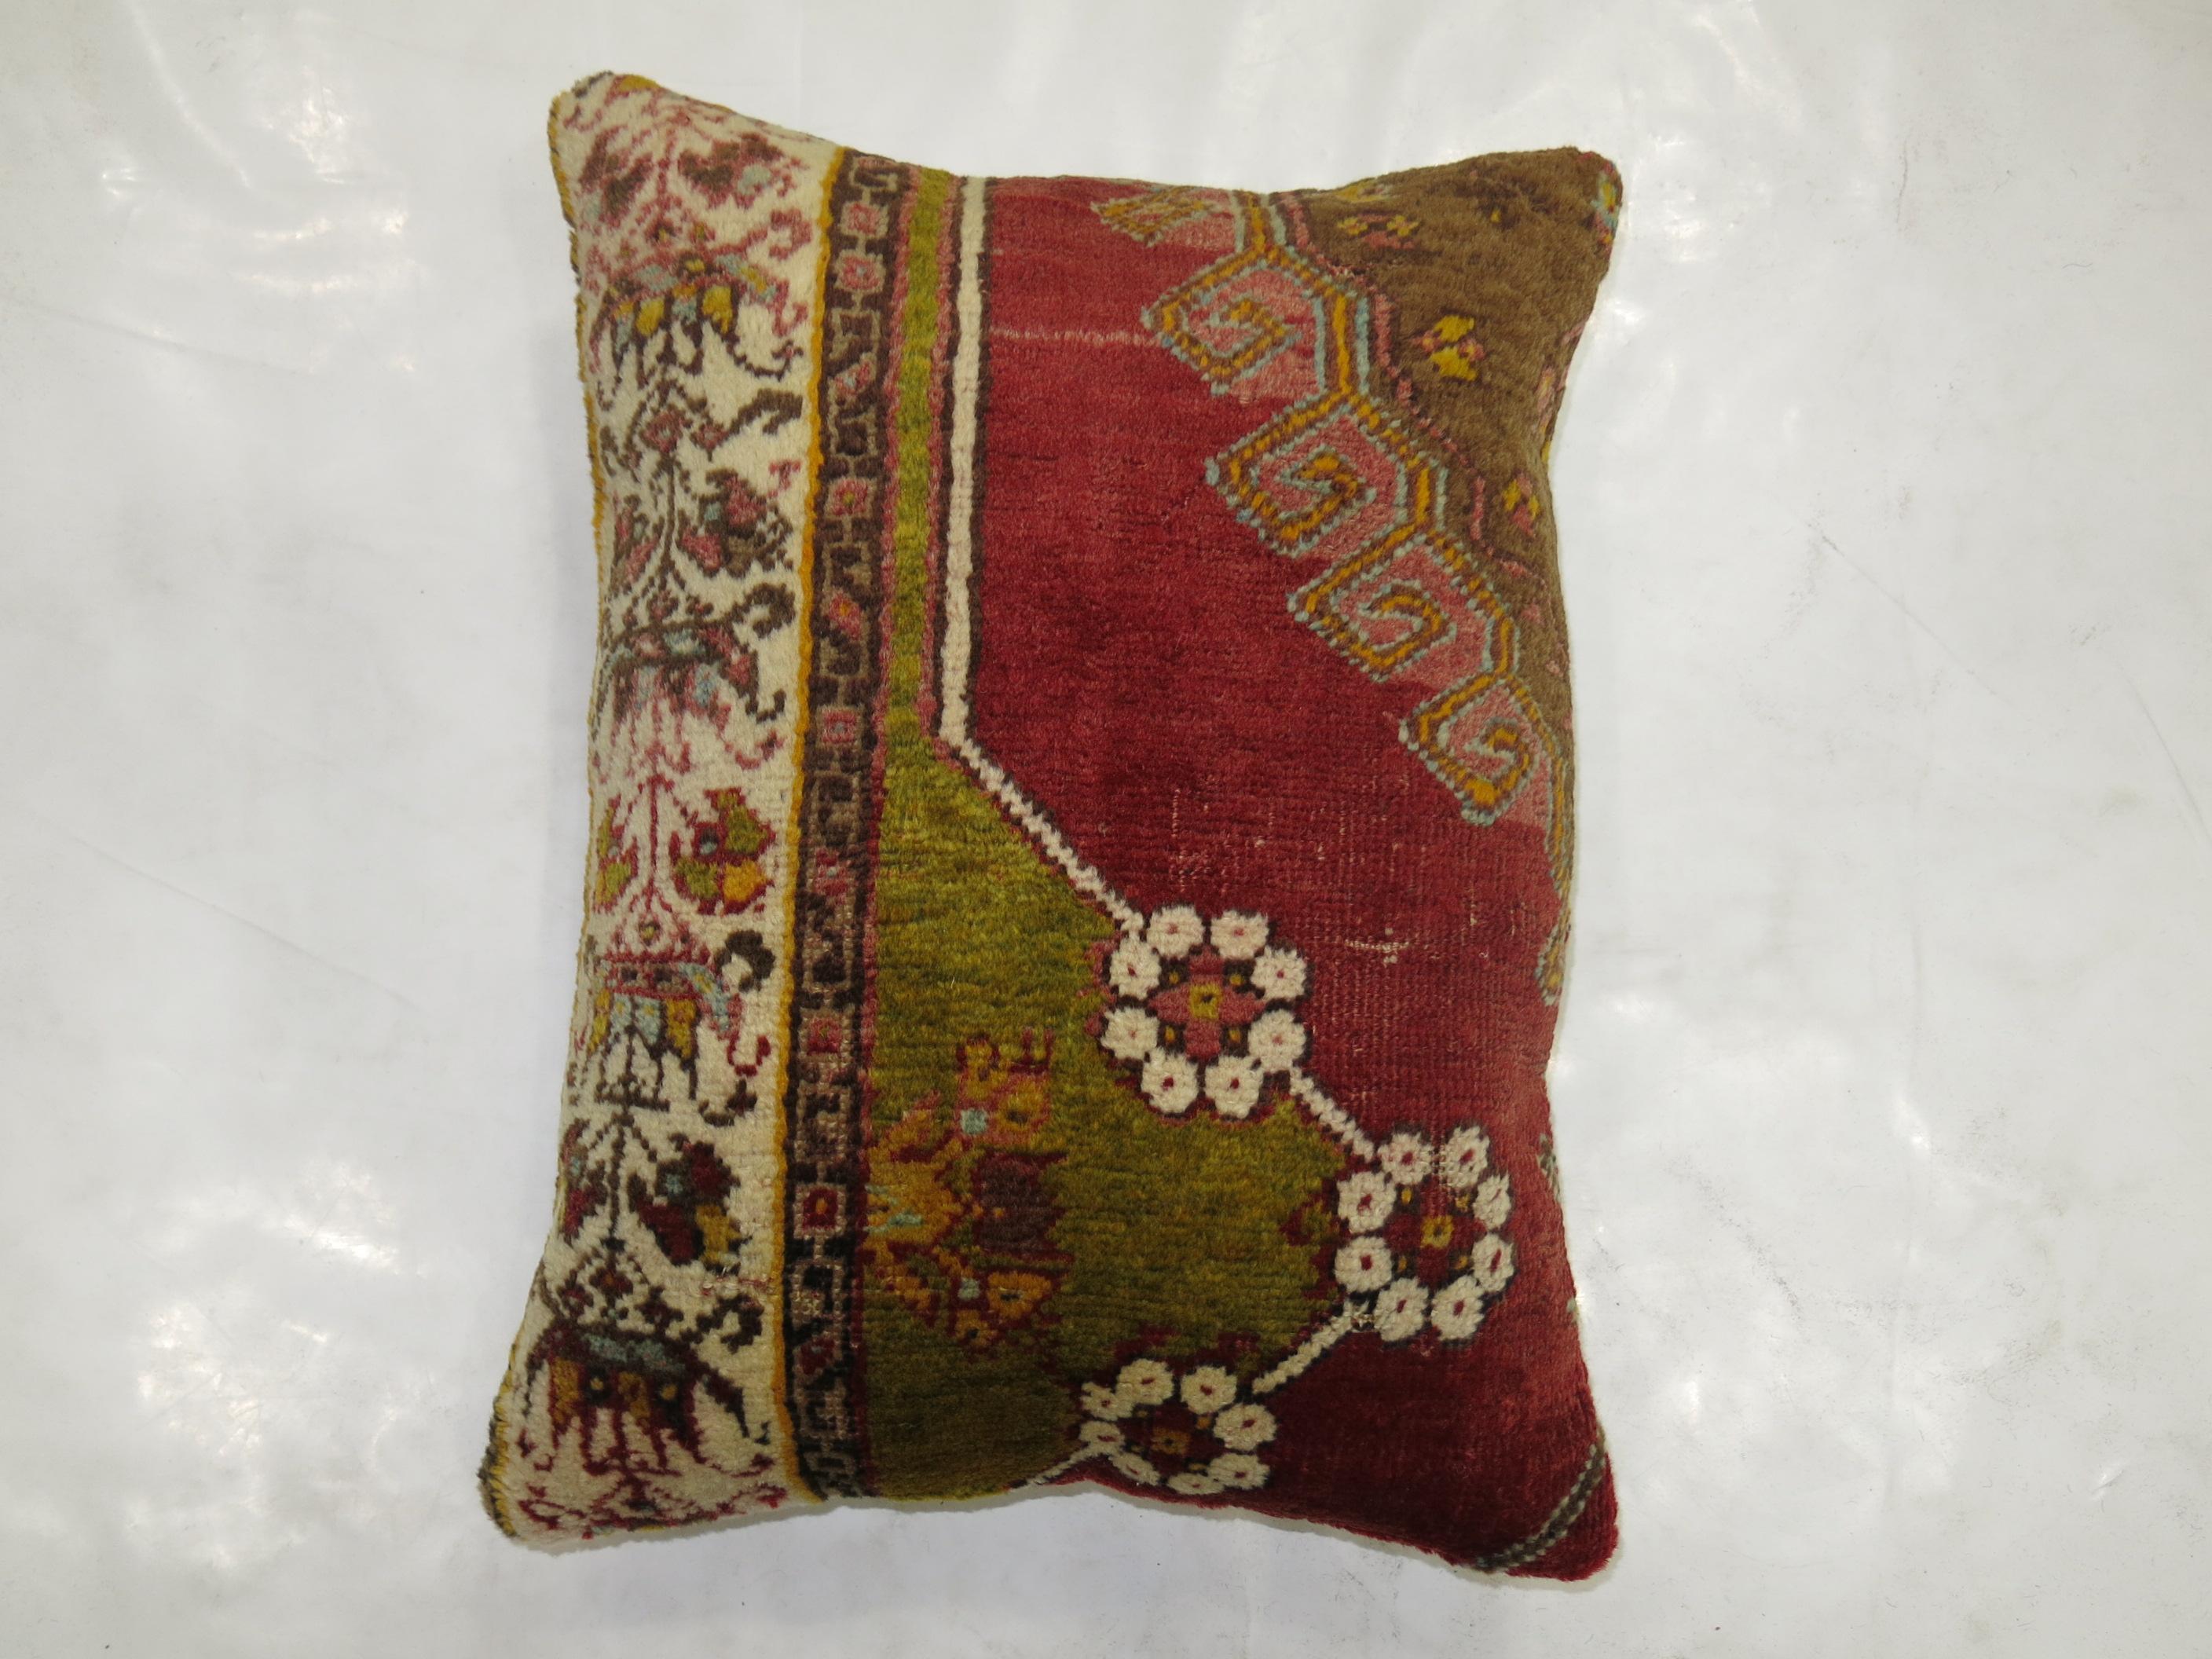 Pillow made from an antique Turkish rug from the early 20th century.

Measures: 15